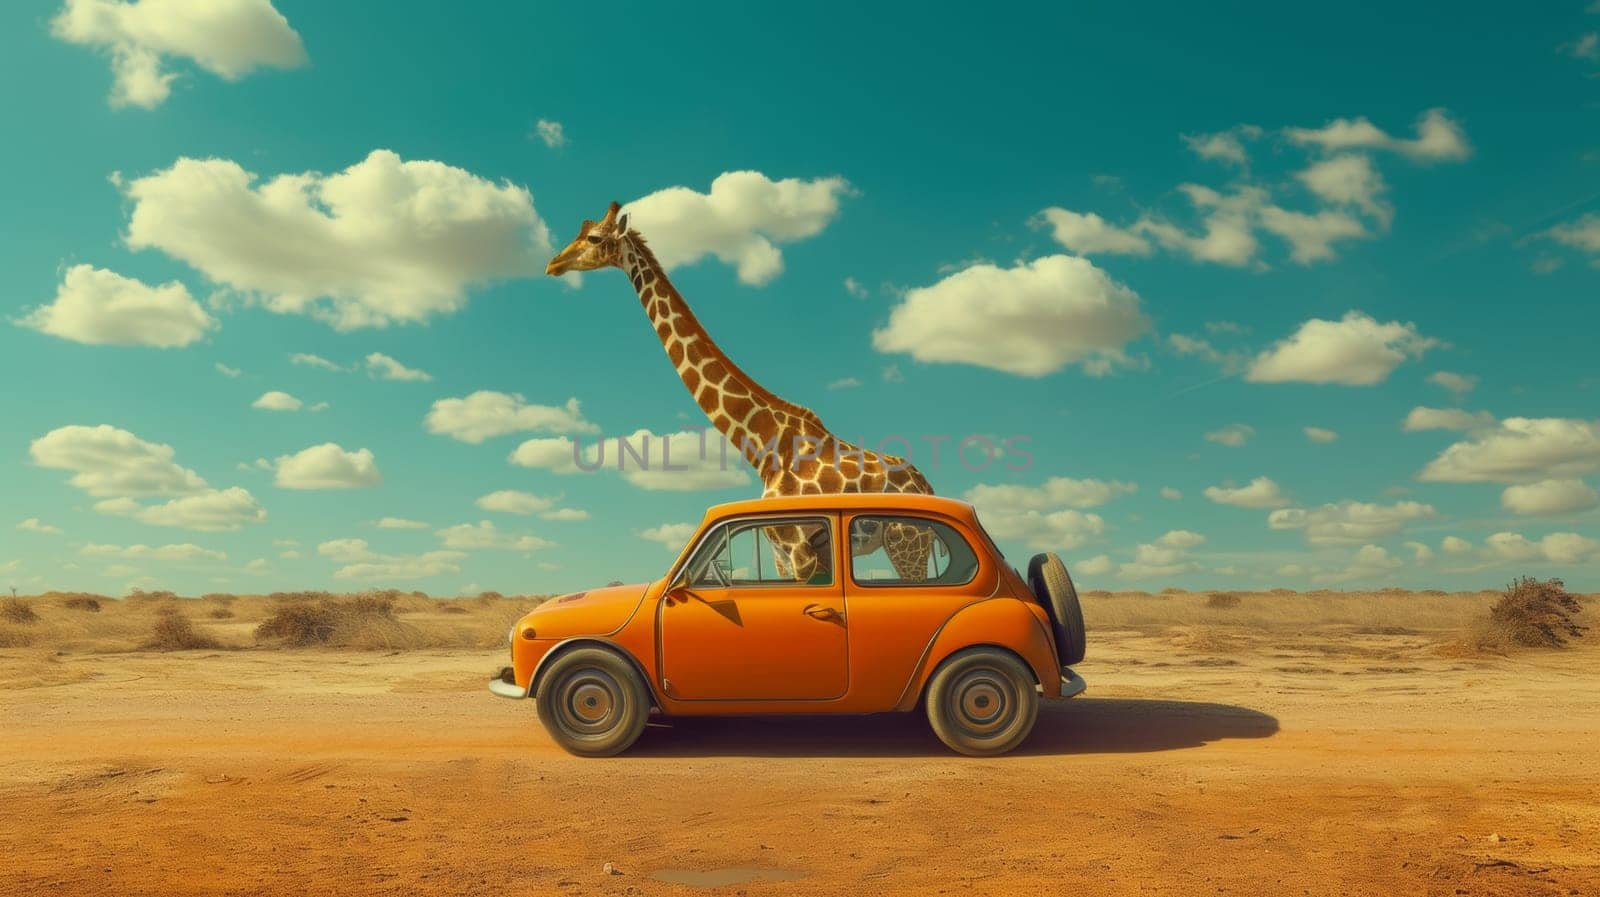 A giraffe standing in front of a small orange car, AI by starush